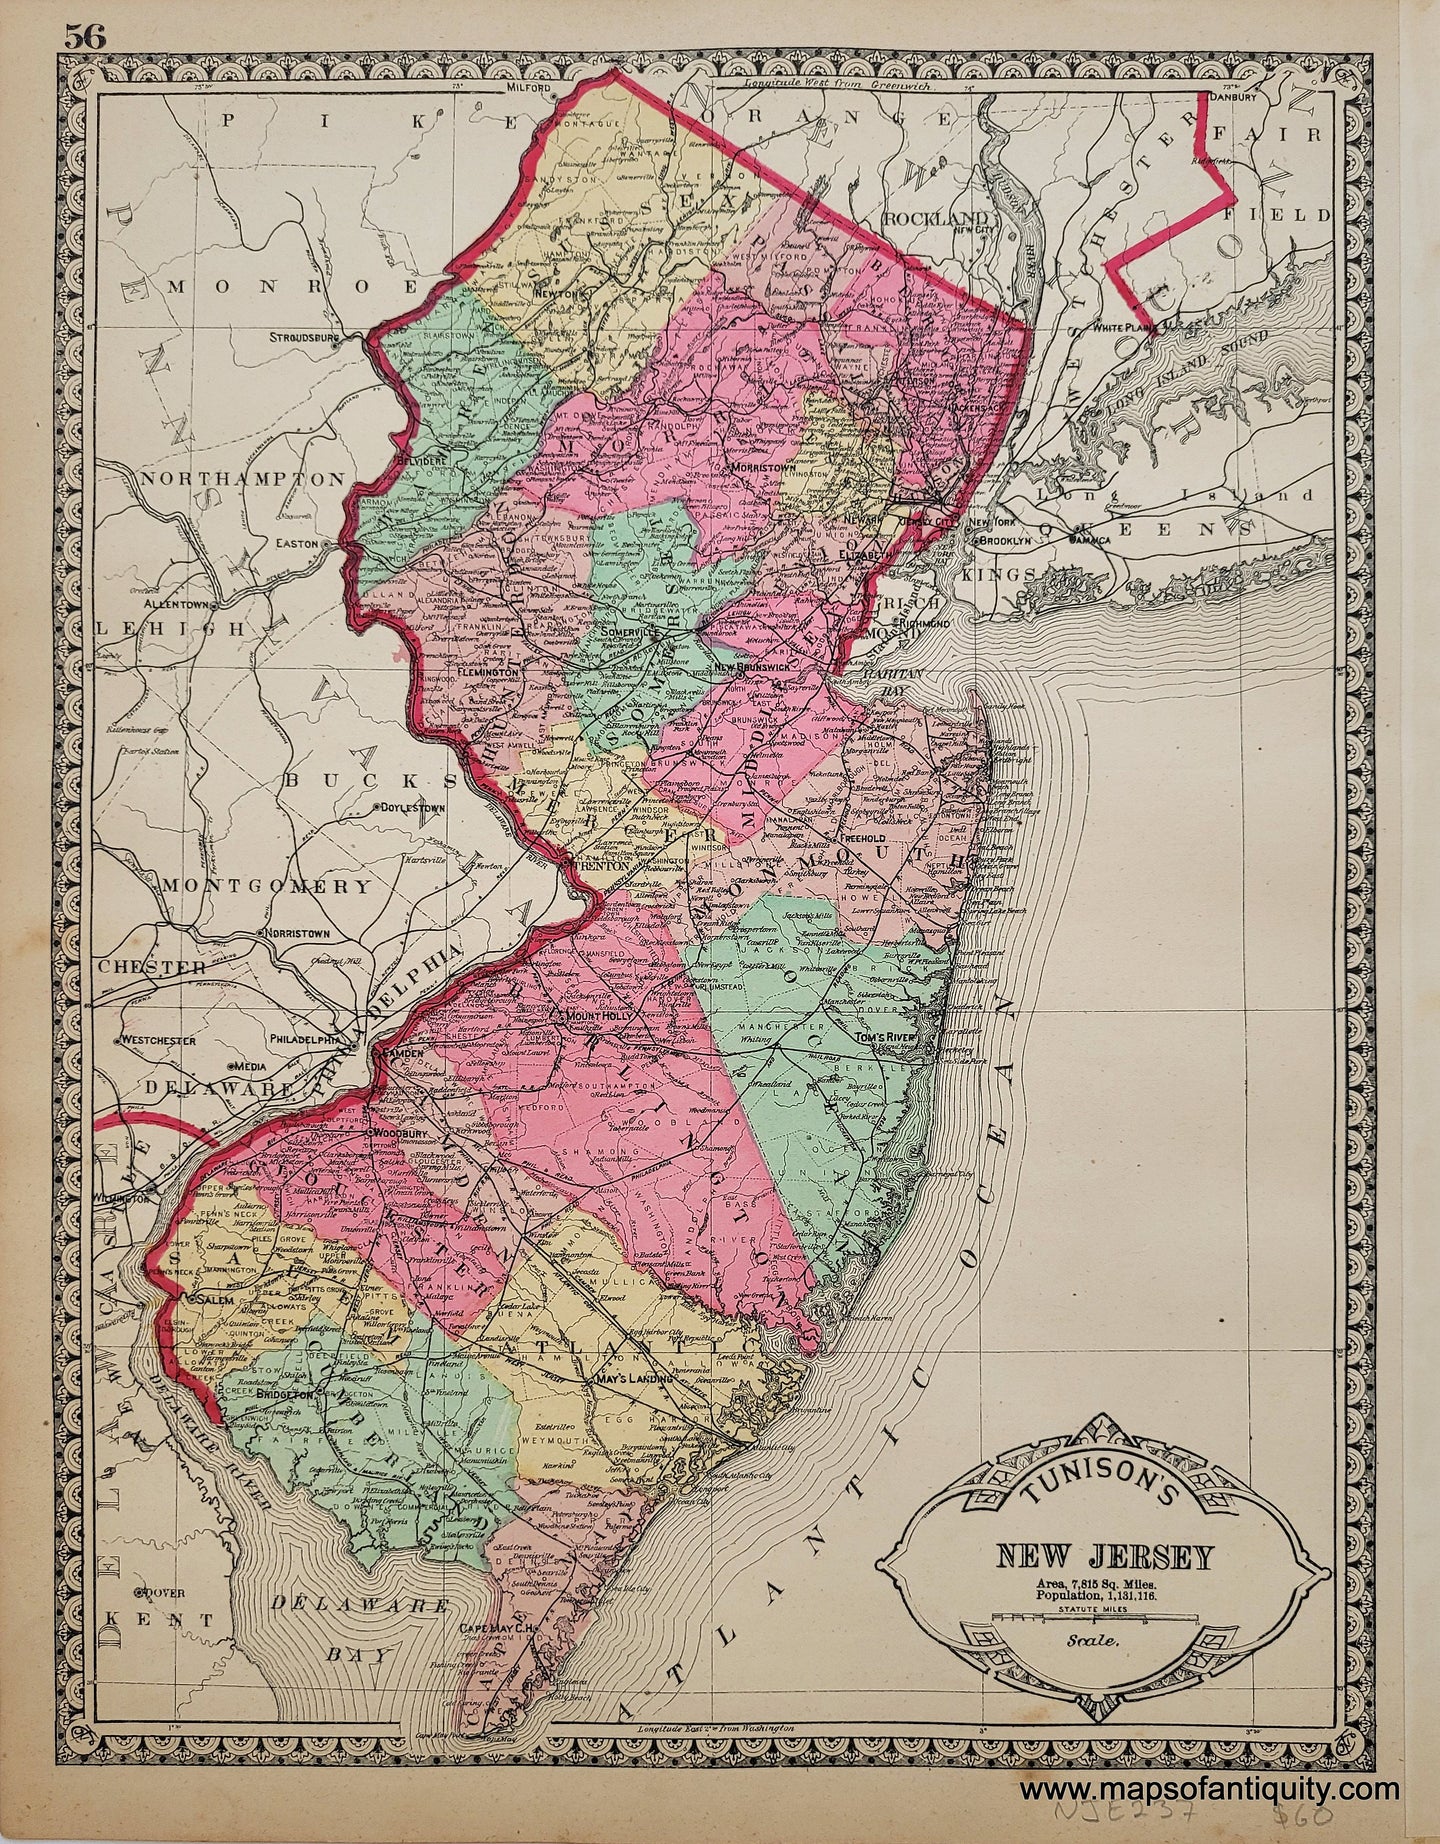 Antique-Hand-Colored-Map-Tunison's-New-Jersey-United-States-Northeast-1880-Tunison-Maps-Of-Antiquity